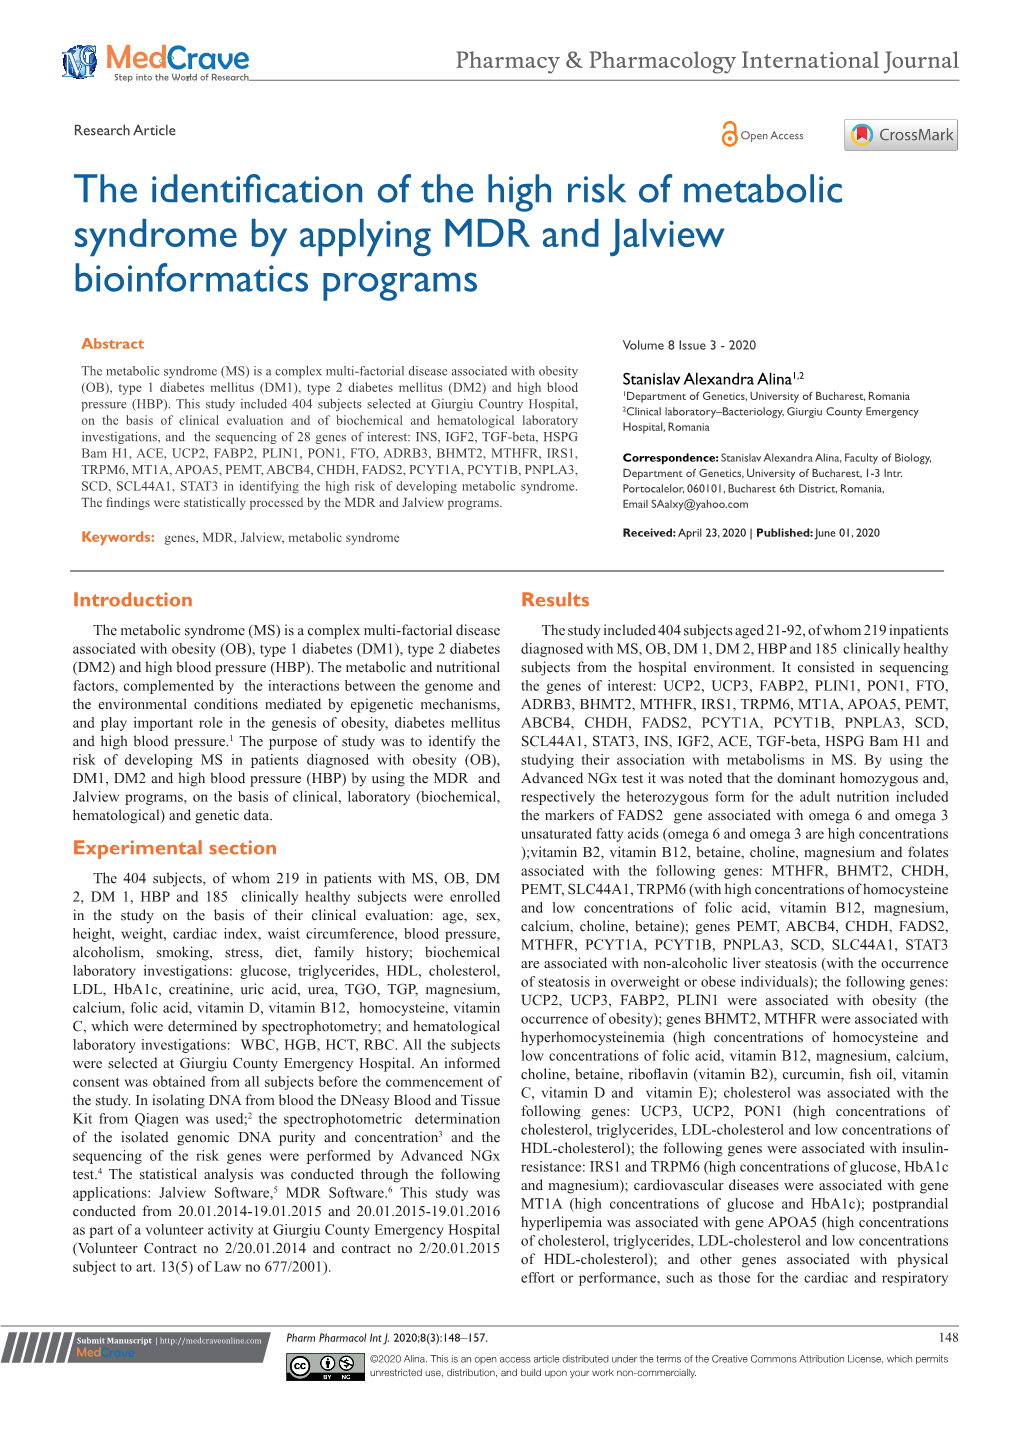 The Identification of the High Risk of Metabolic Syndrome by Applying MDR and Jalview Bioinformatics Programs